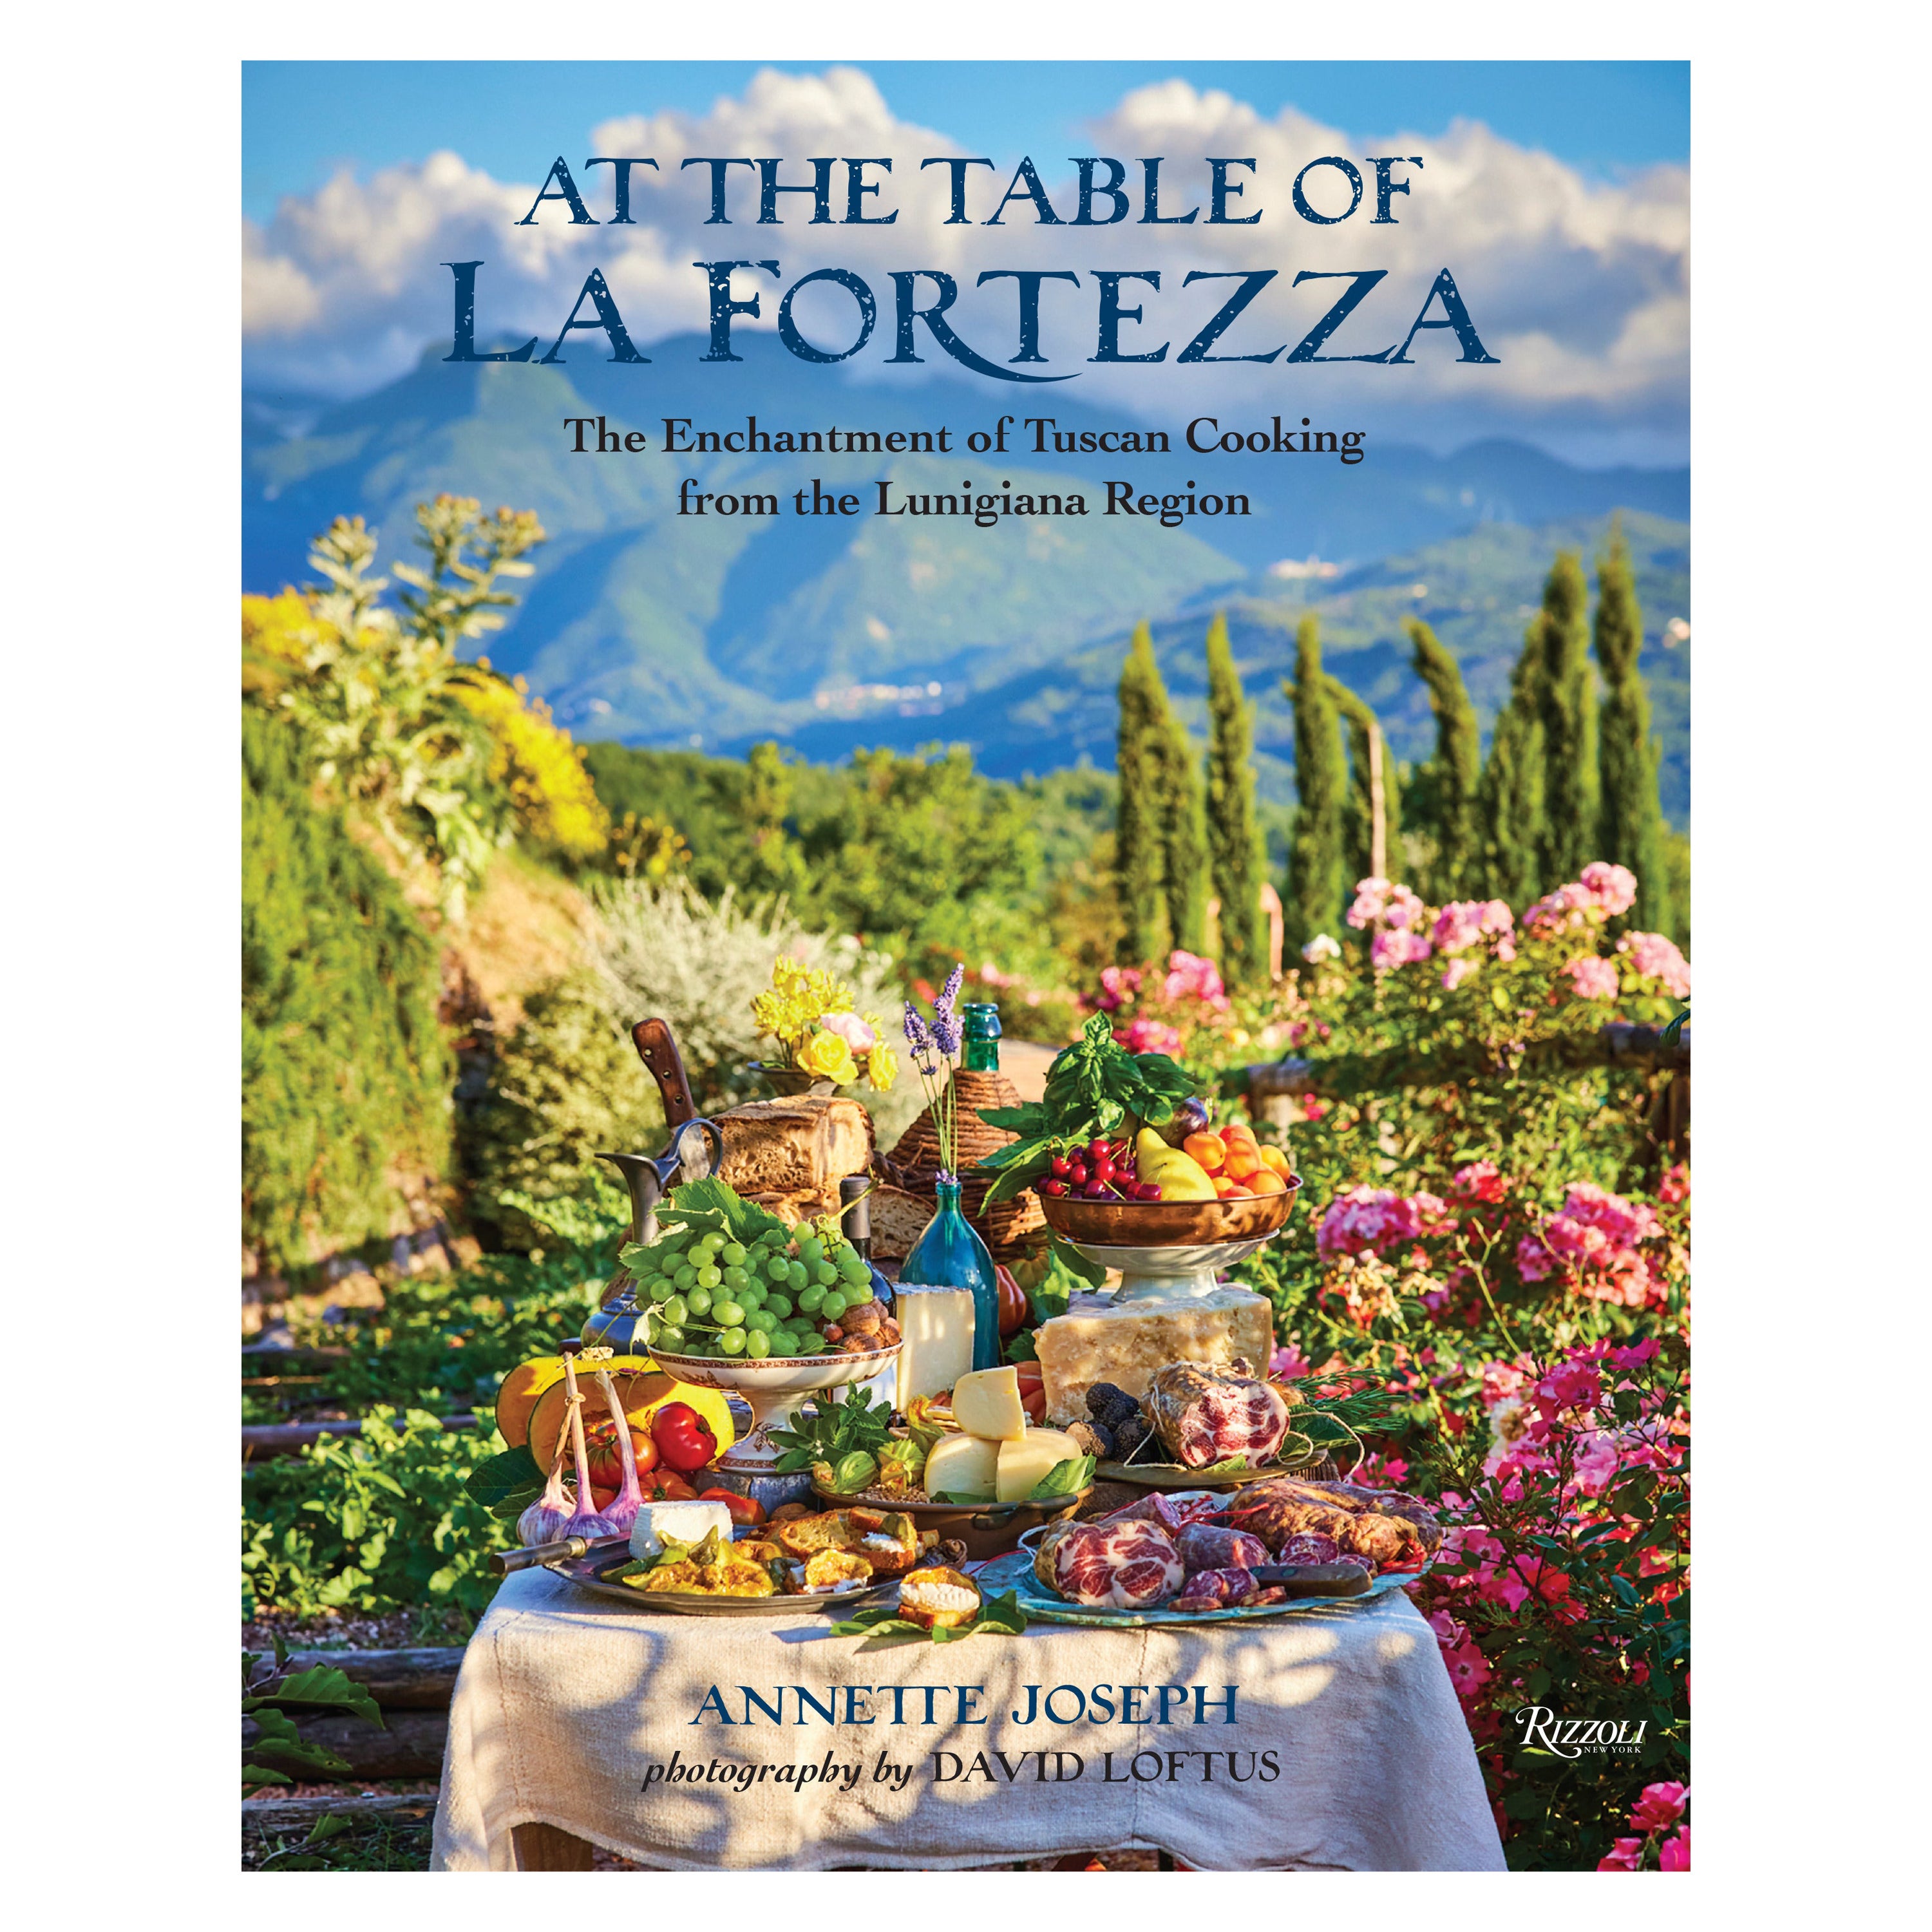 At the Table of La Fortezza, The Enchantment of Tuscan Cooking